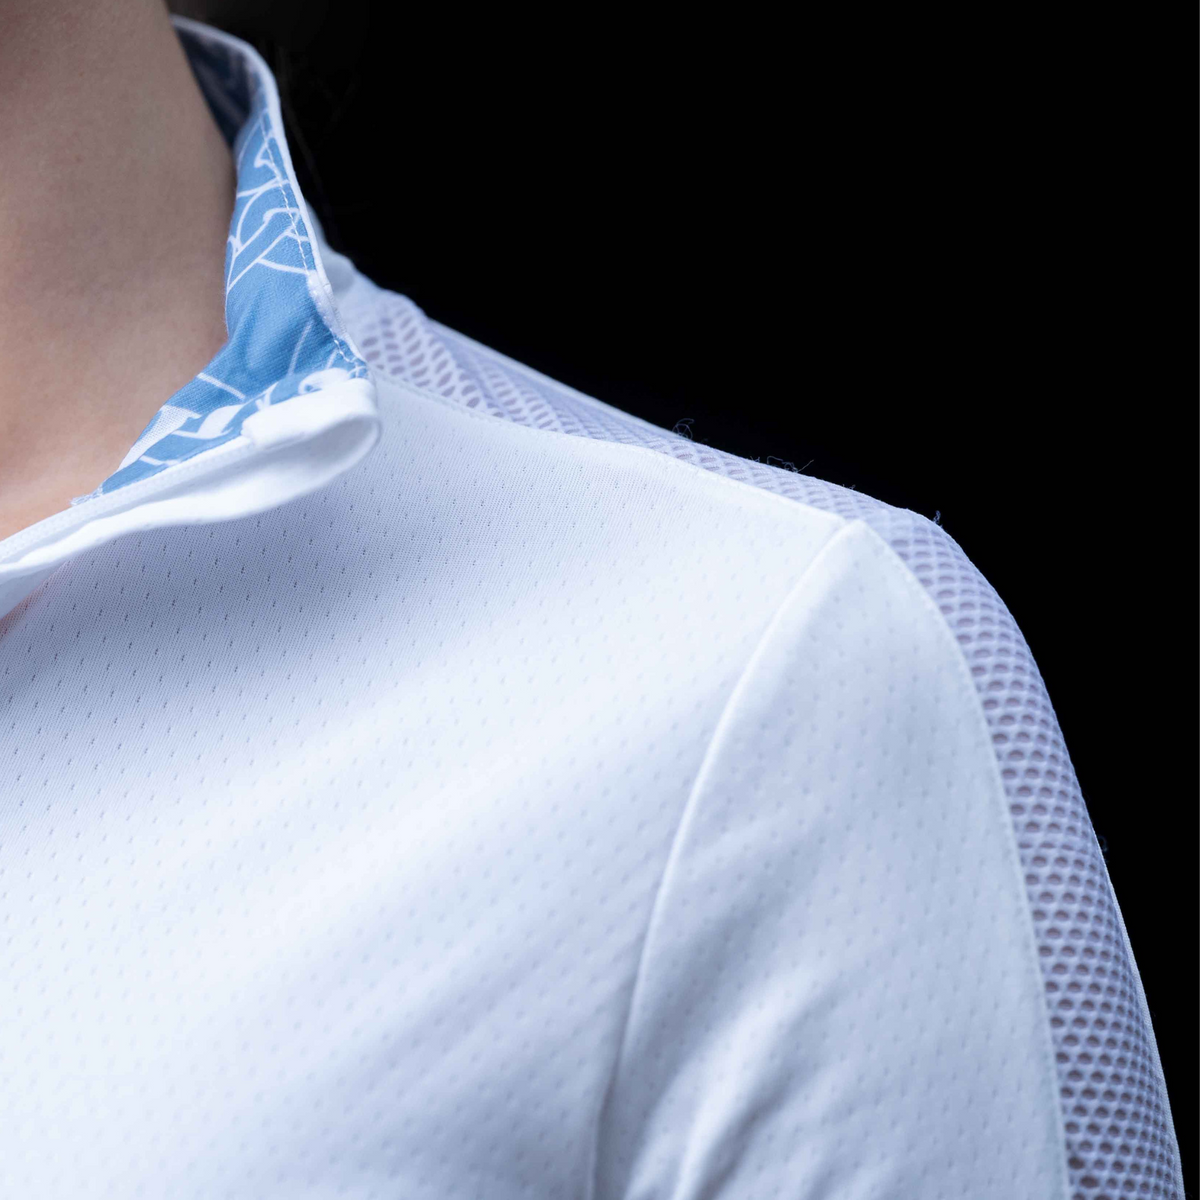 shoulder and collar of hunter shirt, showing mesh and contrast pattern.